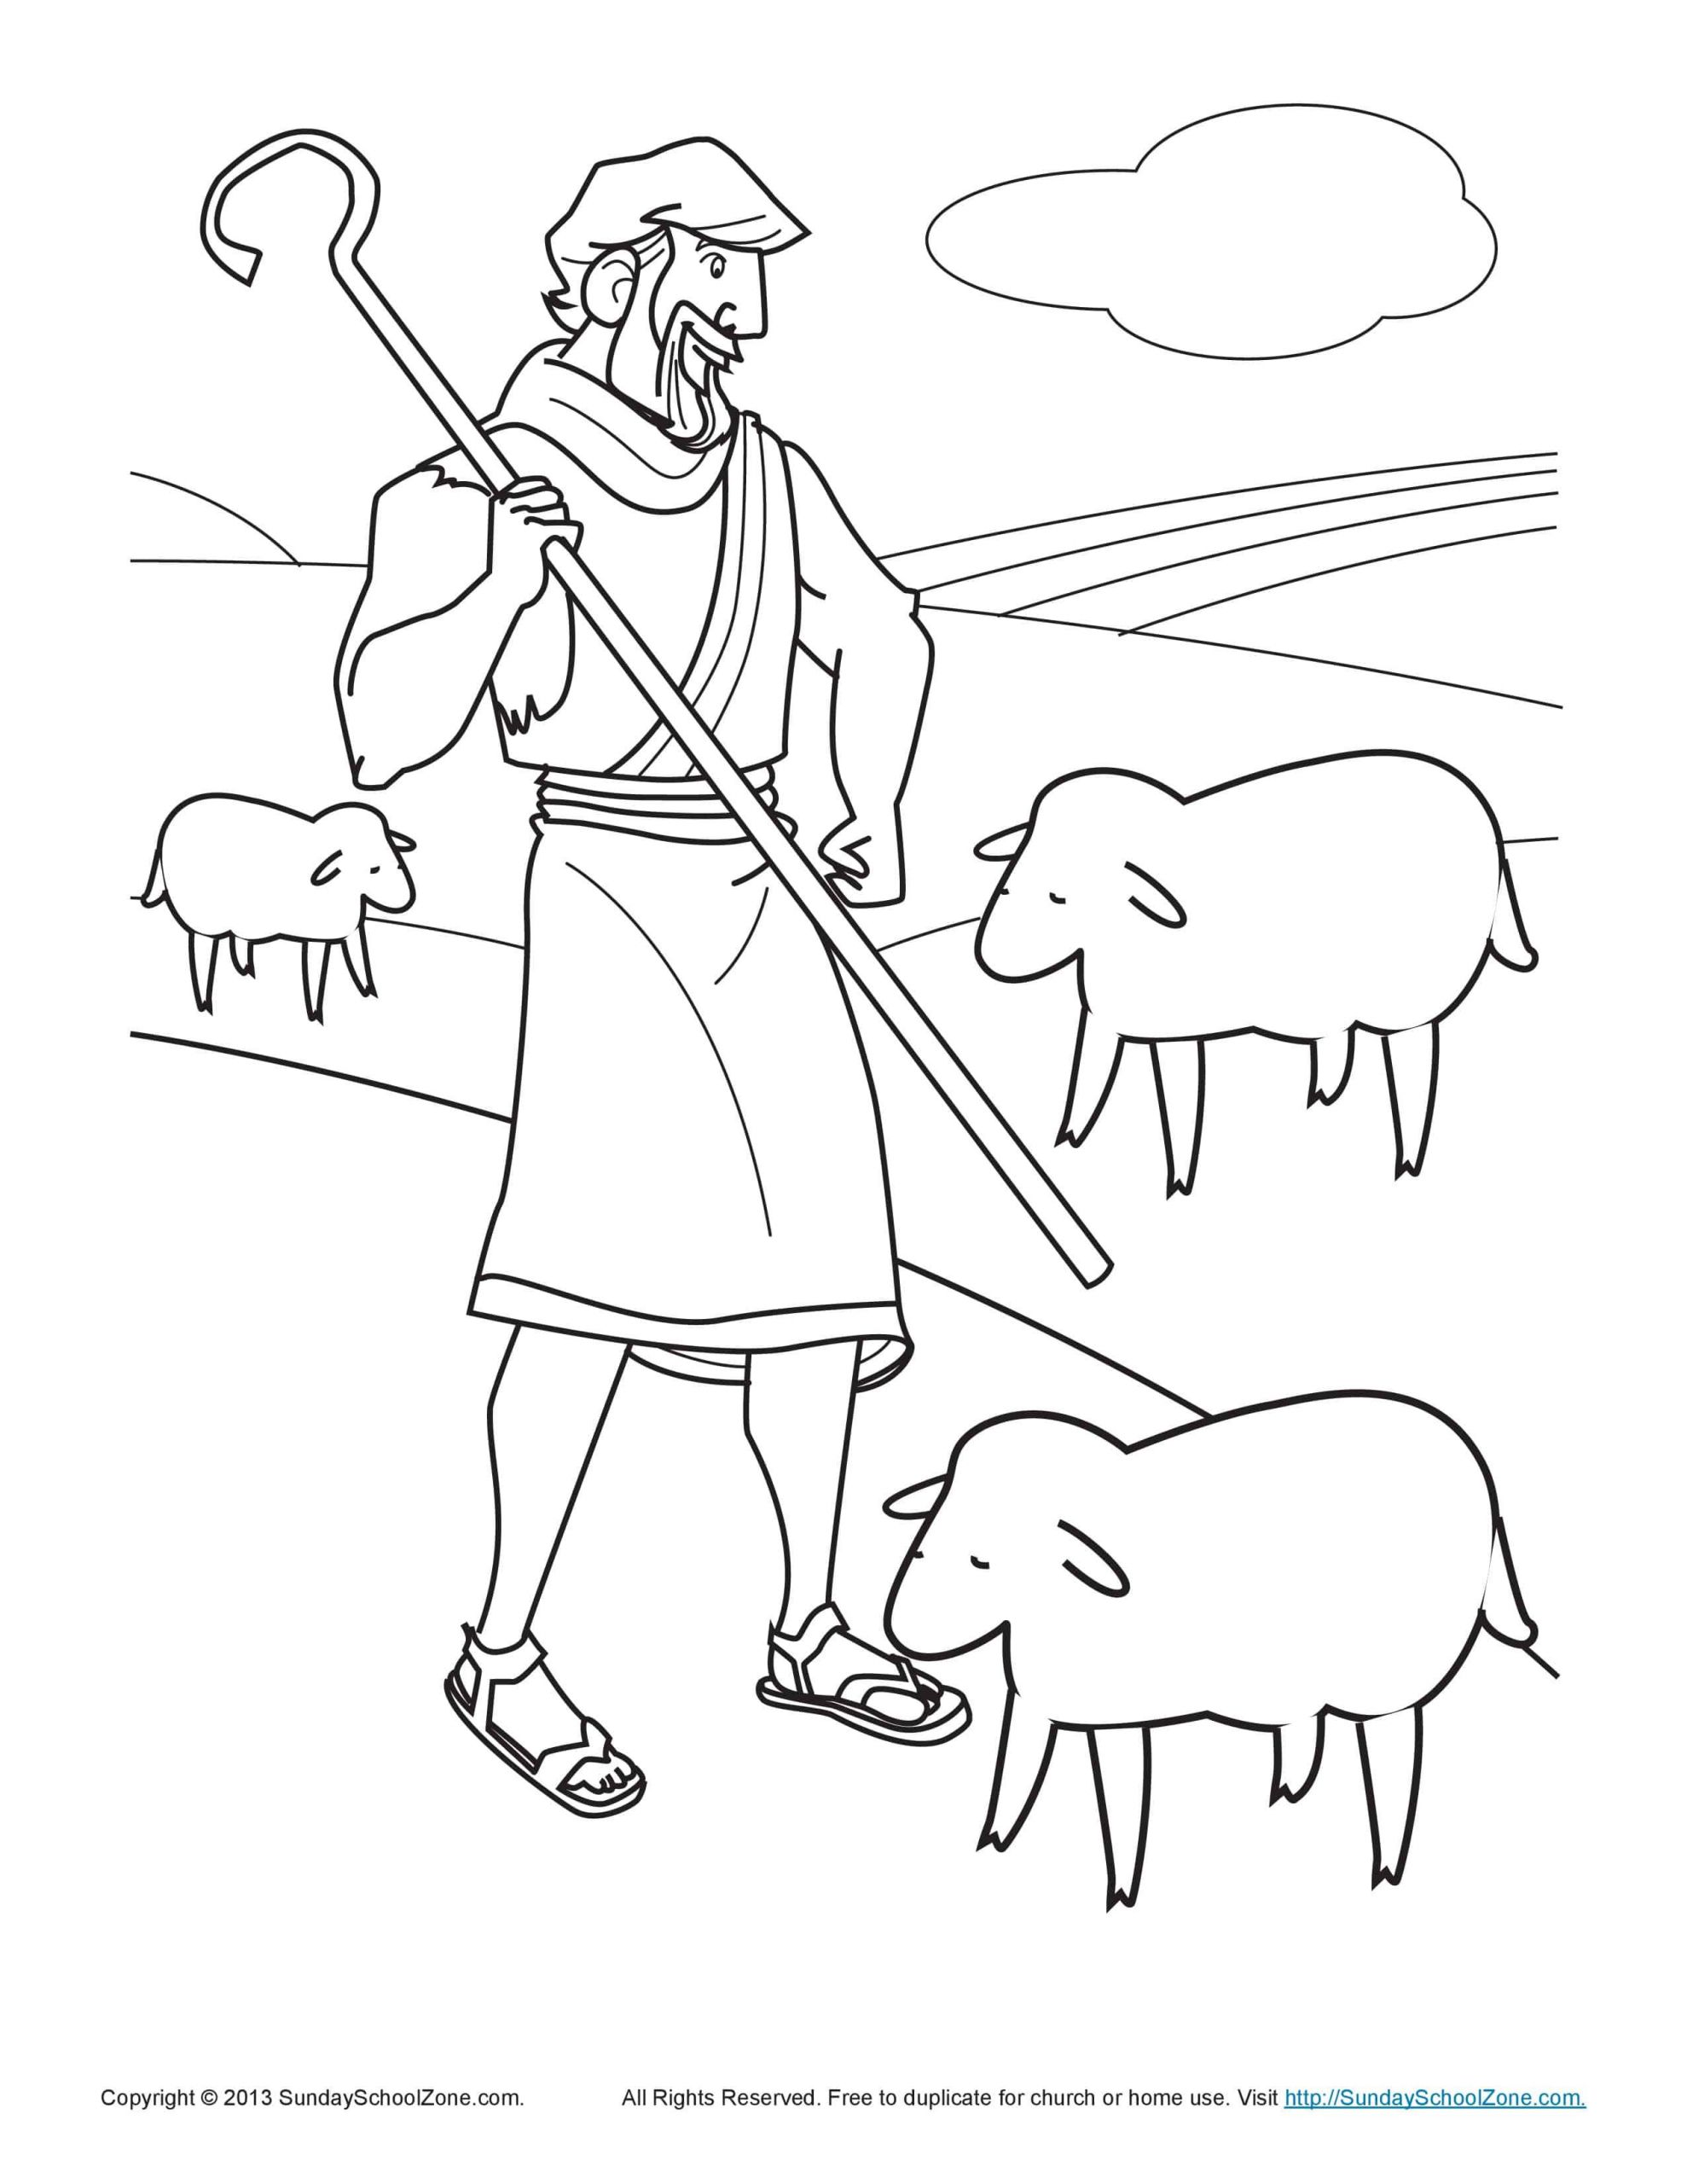 Free Bible Coloring Pages For Kids
 Bible Coloring Pages for Kids